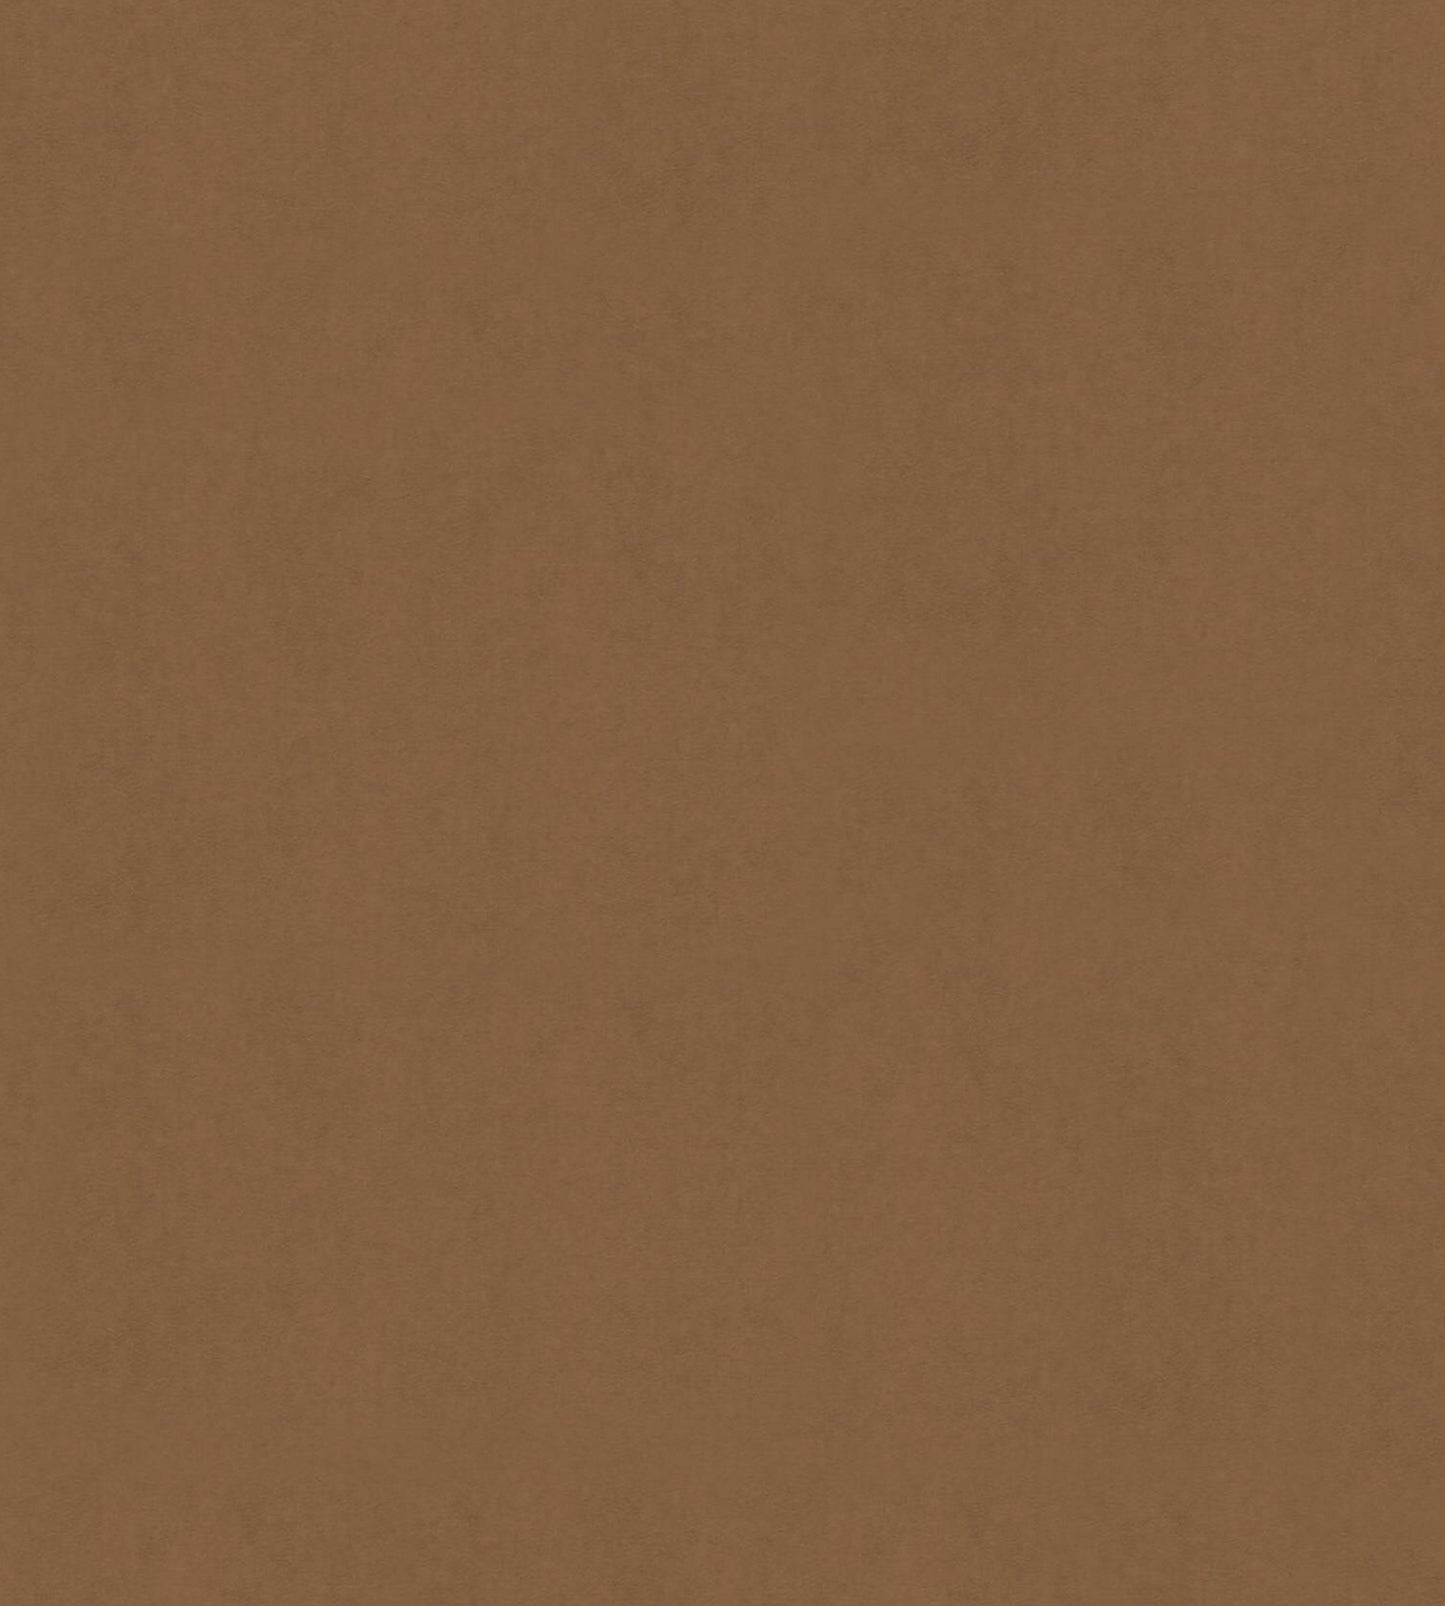 Purchase Old World Weavers Fabric Pattern# AB 00051000, Sensuede Cappucino 1